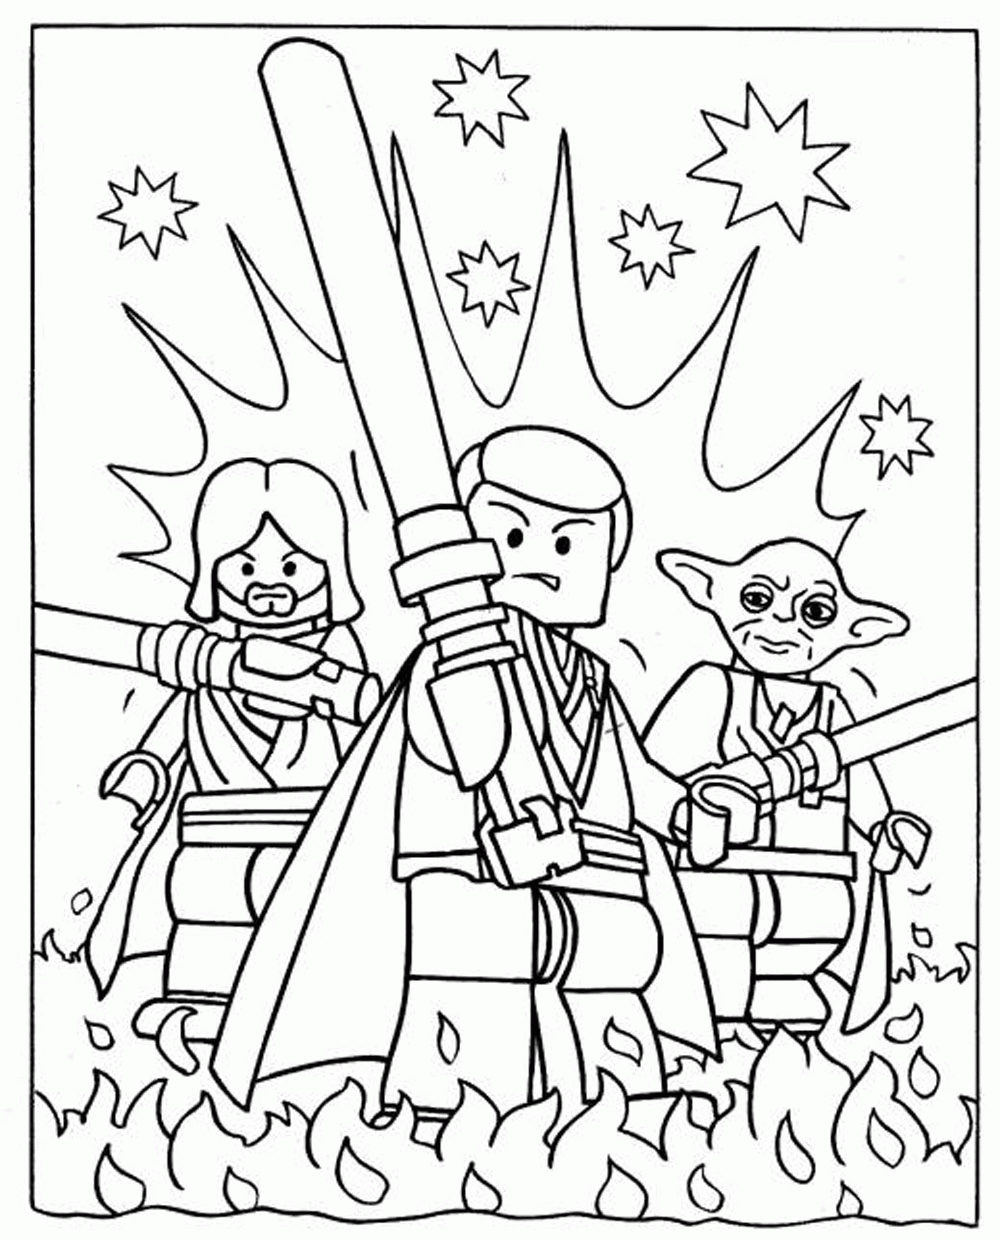 Star Wars Lego Free Coloring Pages - Coloring Home